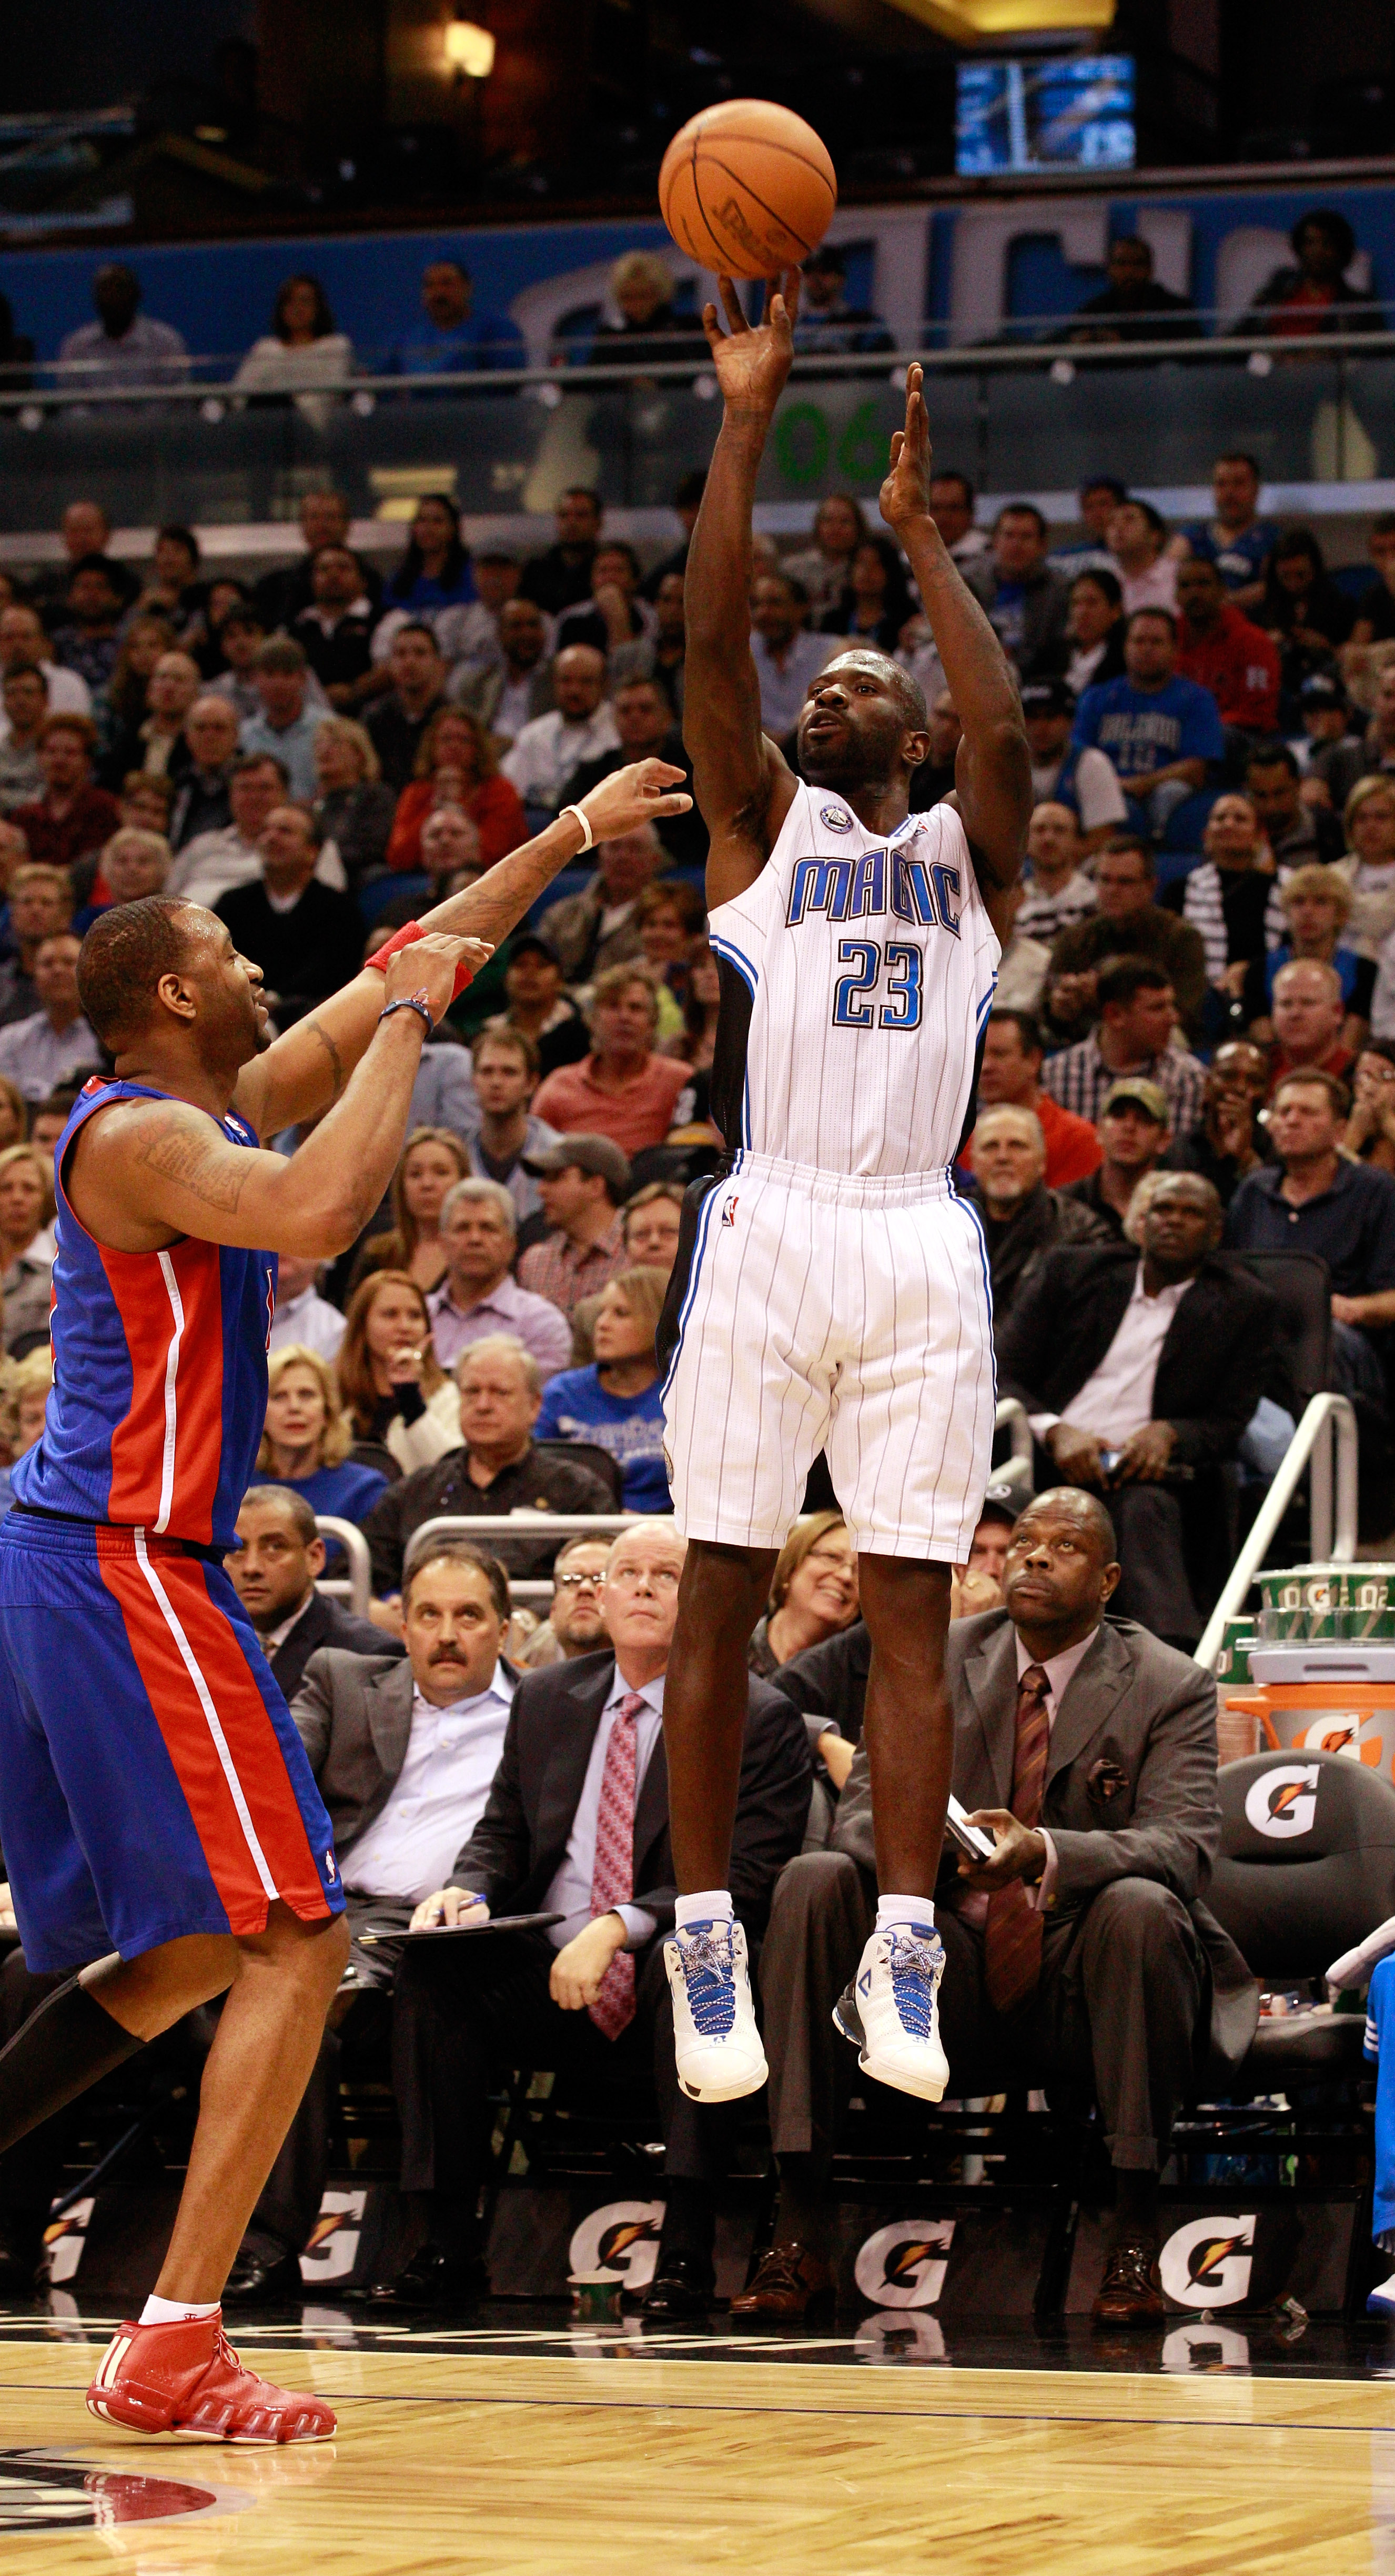 ORLANDO, FL - JANUARY 24:  Jason Richardson #23 of the Orlando Magic attempts a shot over Tracy McGrady #1 of the Detroit Pistons during the game at Amway Arena on January 24, 2011 in Orlando, Florida.  NOTE TO USER: User expressly acknowledges and agrees